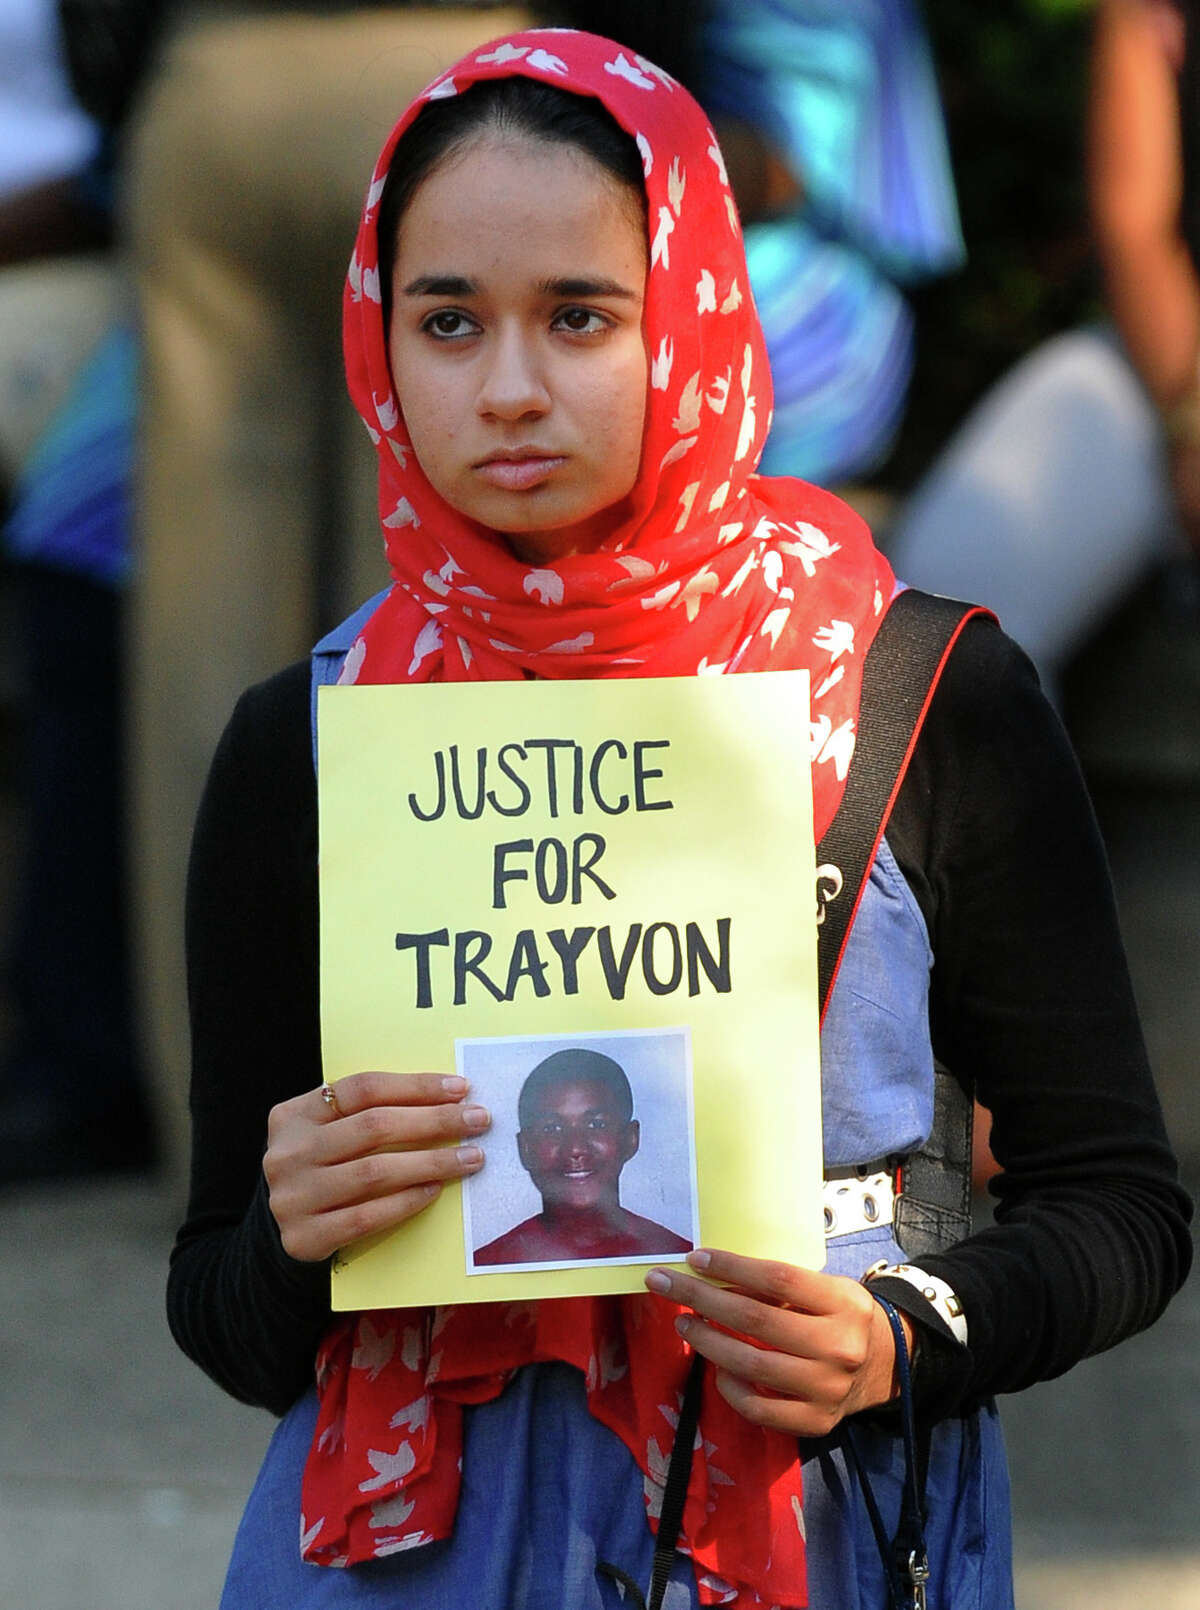 Amina Seyal, of Fairfield, holds up a sign while attending a demonstration protesting the acquital of George Zimmerman, in front of the U.S. District Courthouse in downtown Bridgeport, Conn. on Tuesday July 16, 2013.